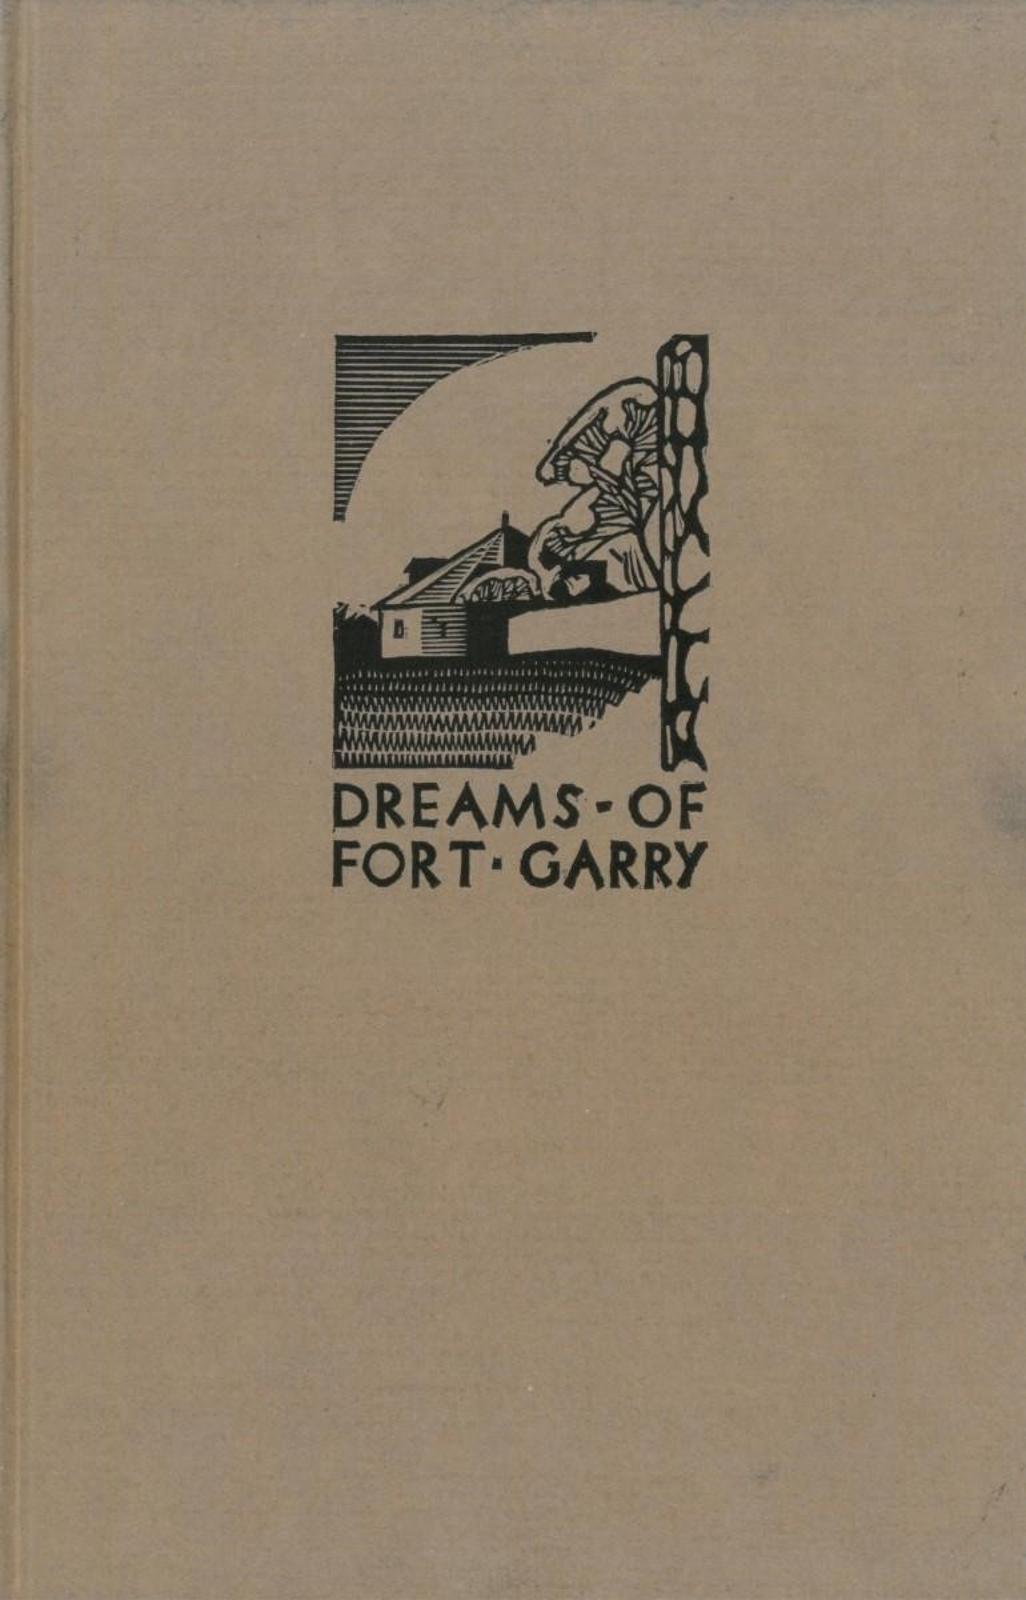 Walter Joseph (W.J.) Phillips (1884-1963) - DREAMS OF FORT GARRY - An Epic Poem on the Life and Times of the Early Settlers of Western Canada, Complete with Glossary and Historical Notes